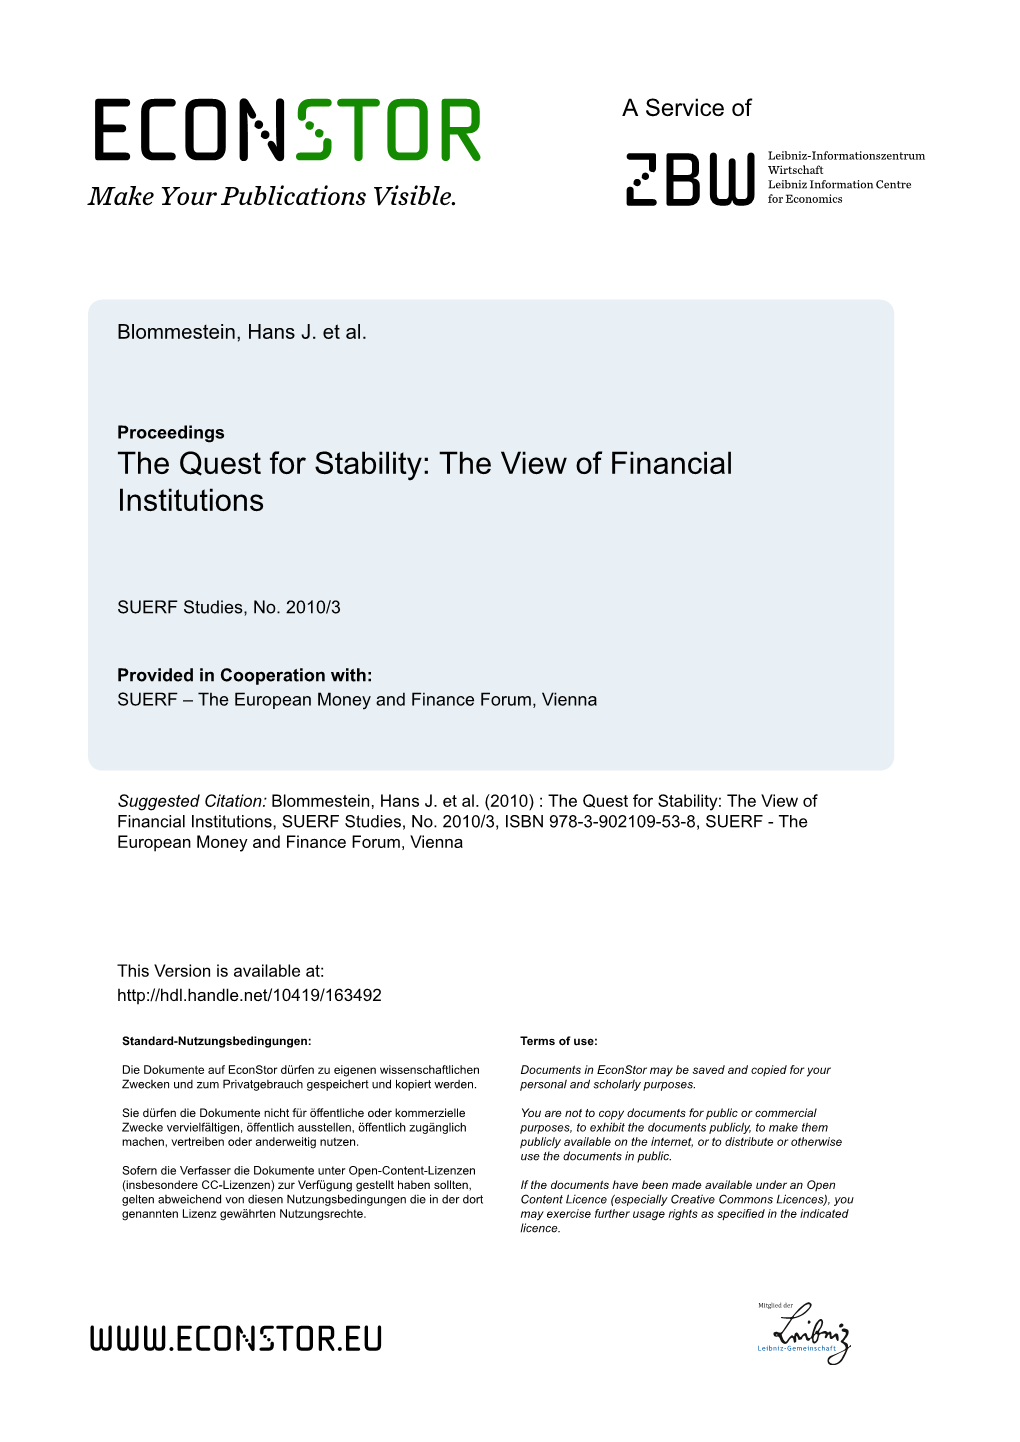 The Quest for Stability: the View of Financial Institutions